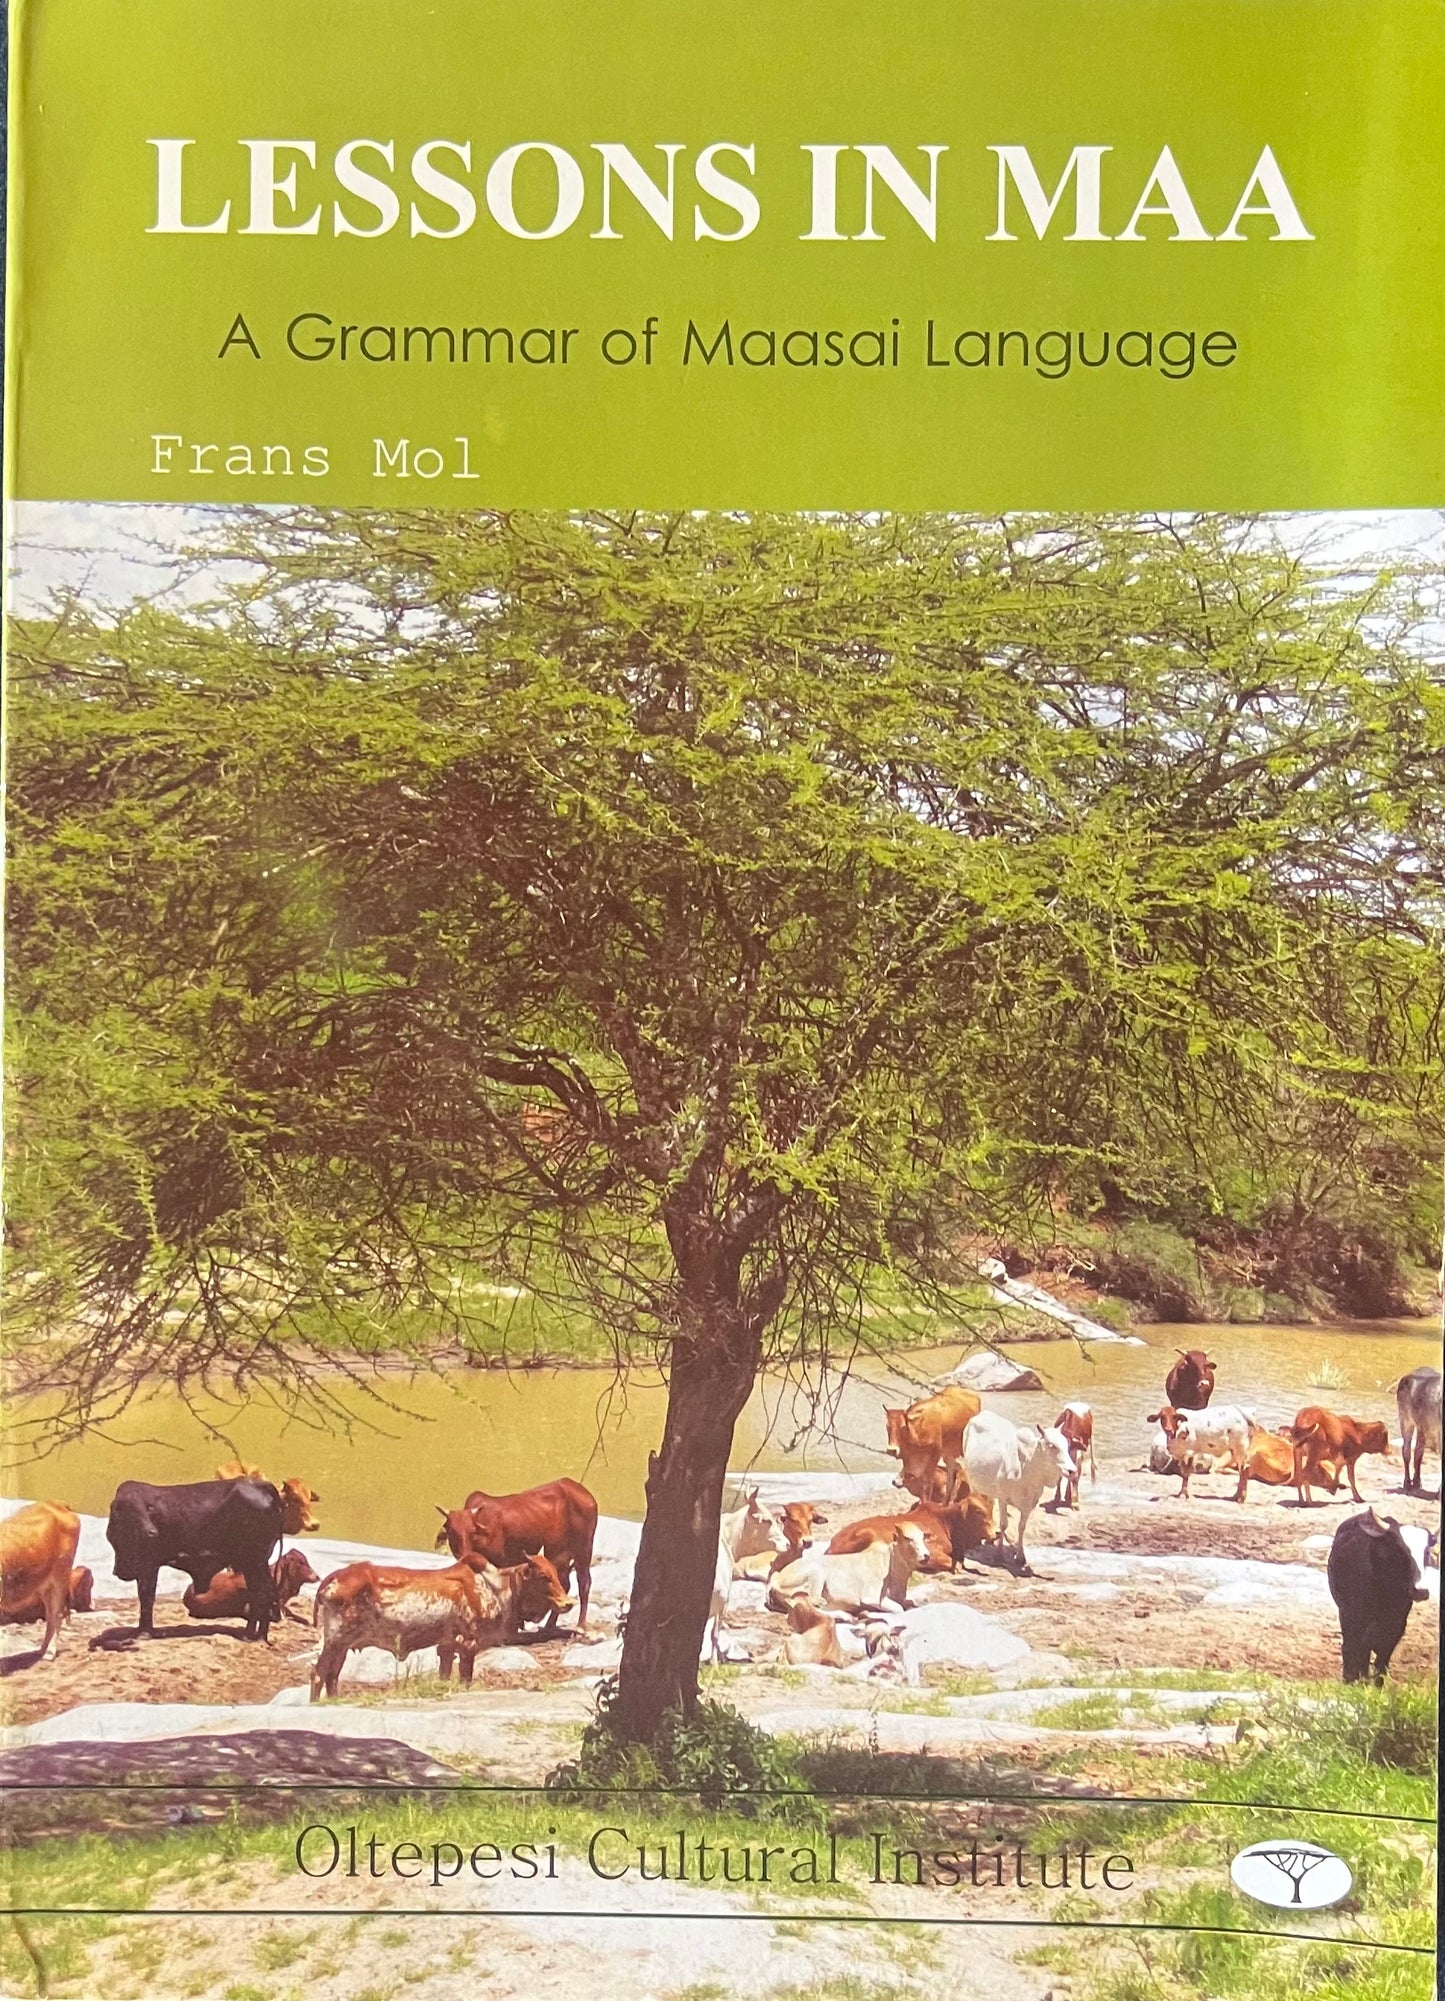 LESSONS IN MAA - A Grammar of Maasai Language by Frans Mol